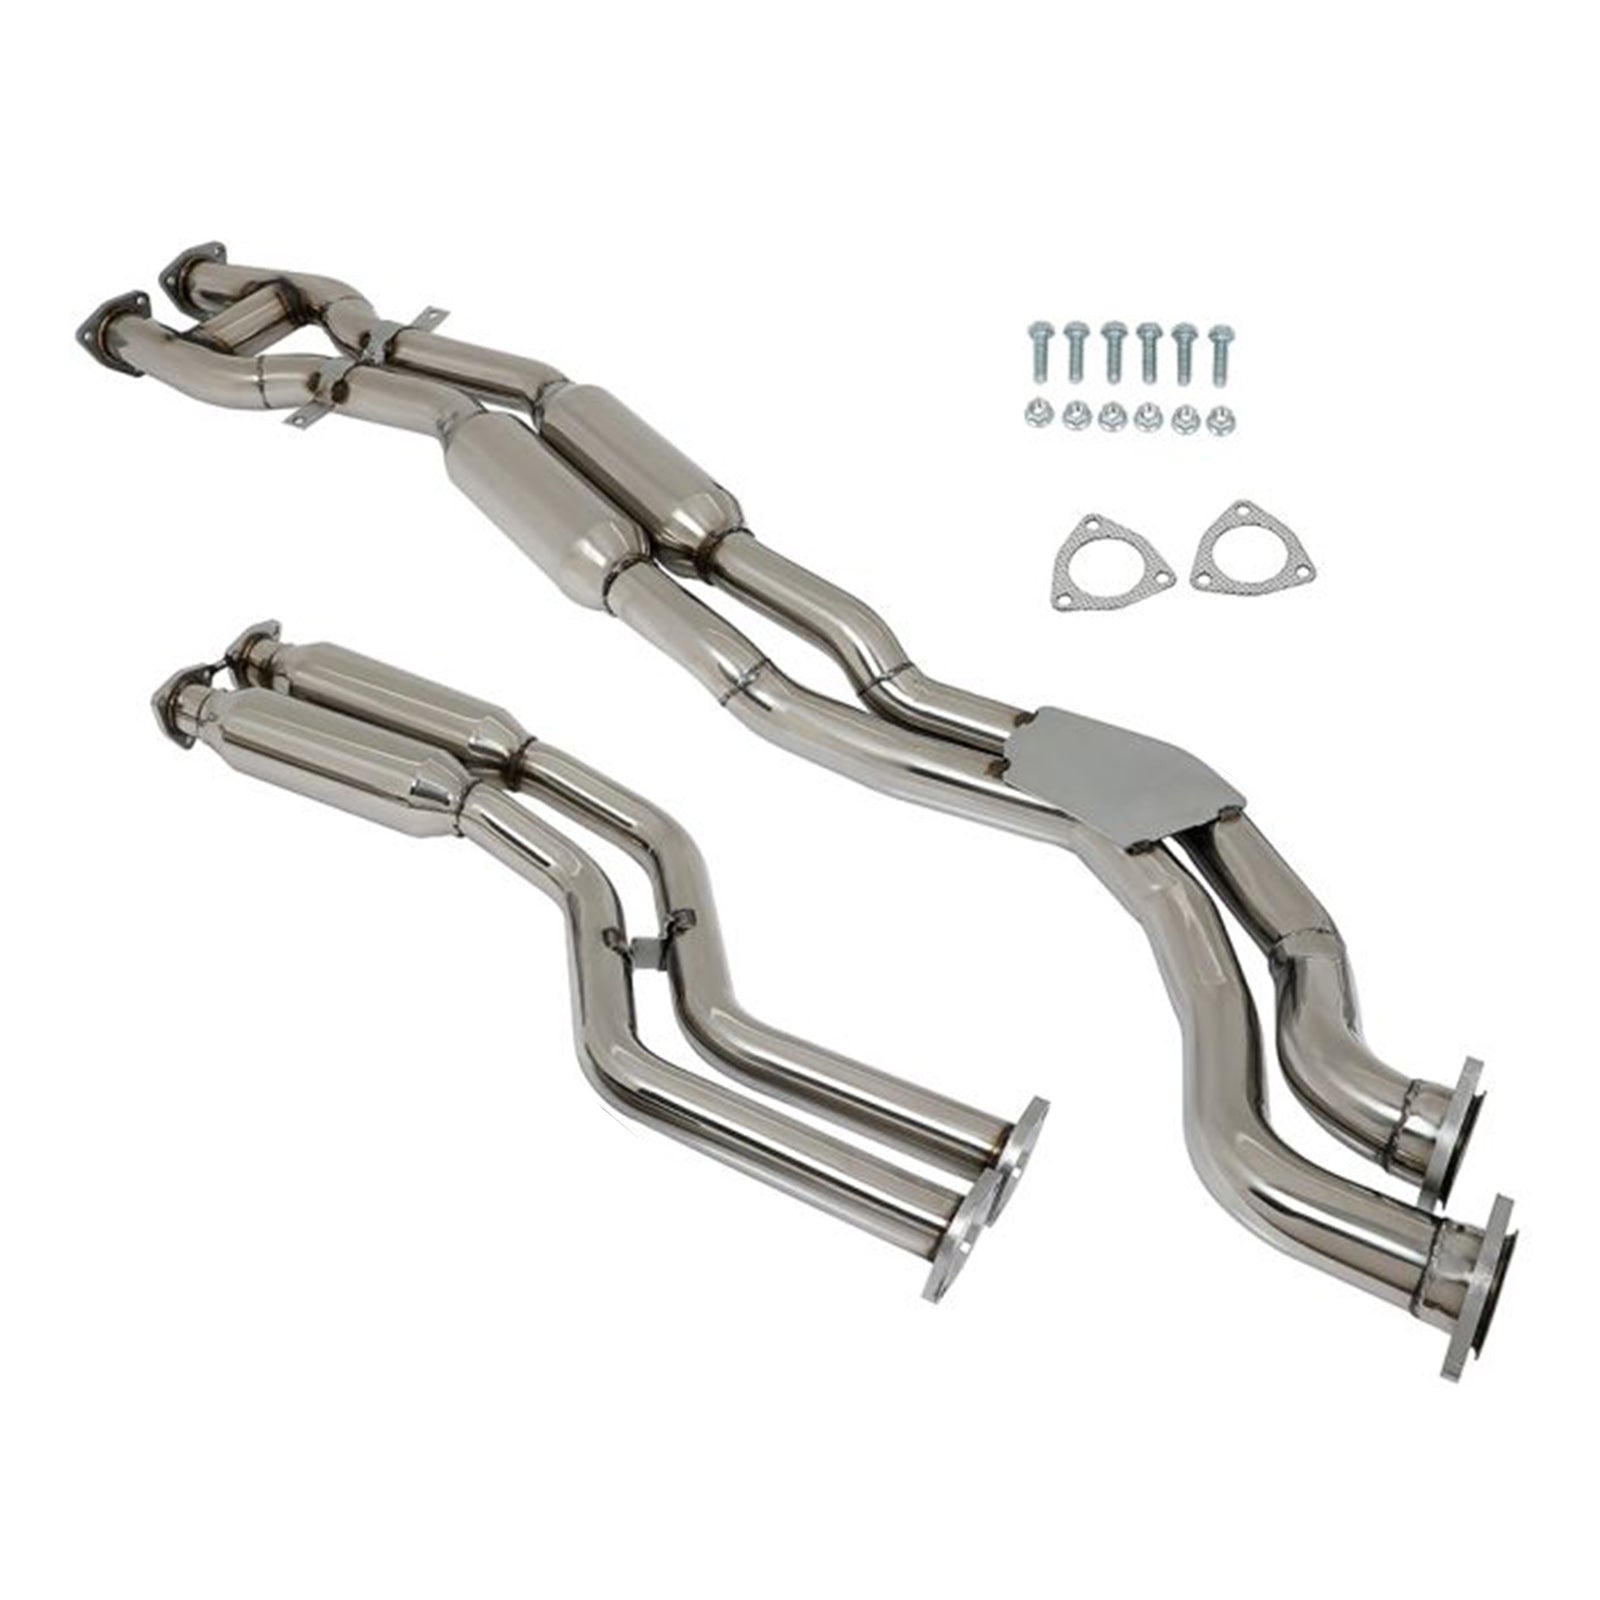 BMW 1999 2001 2003-2006 M3 3.2L Catback Exhaust System Down Pipe Rounded Front Pipe Muffler